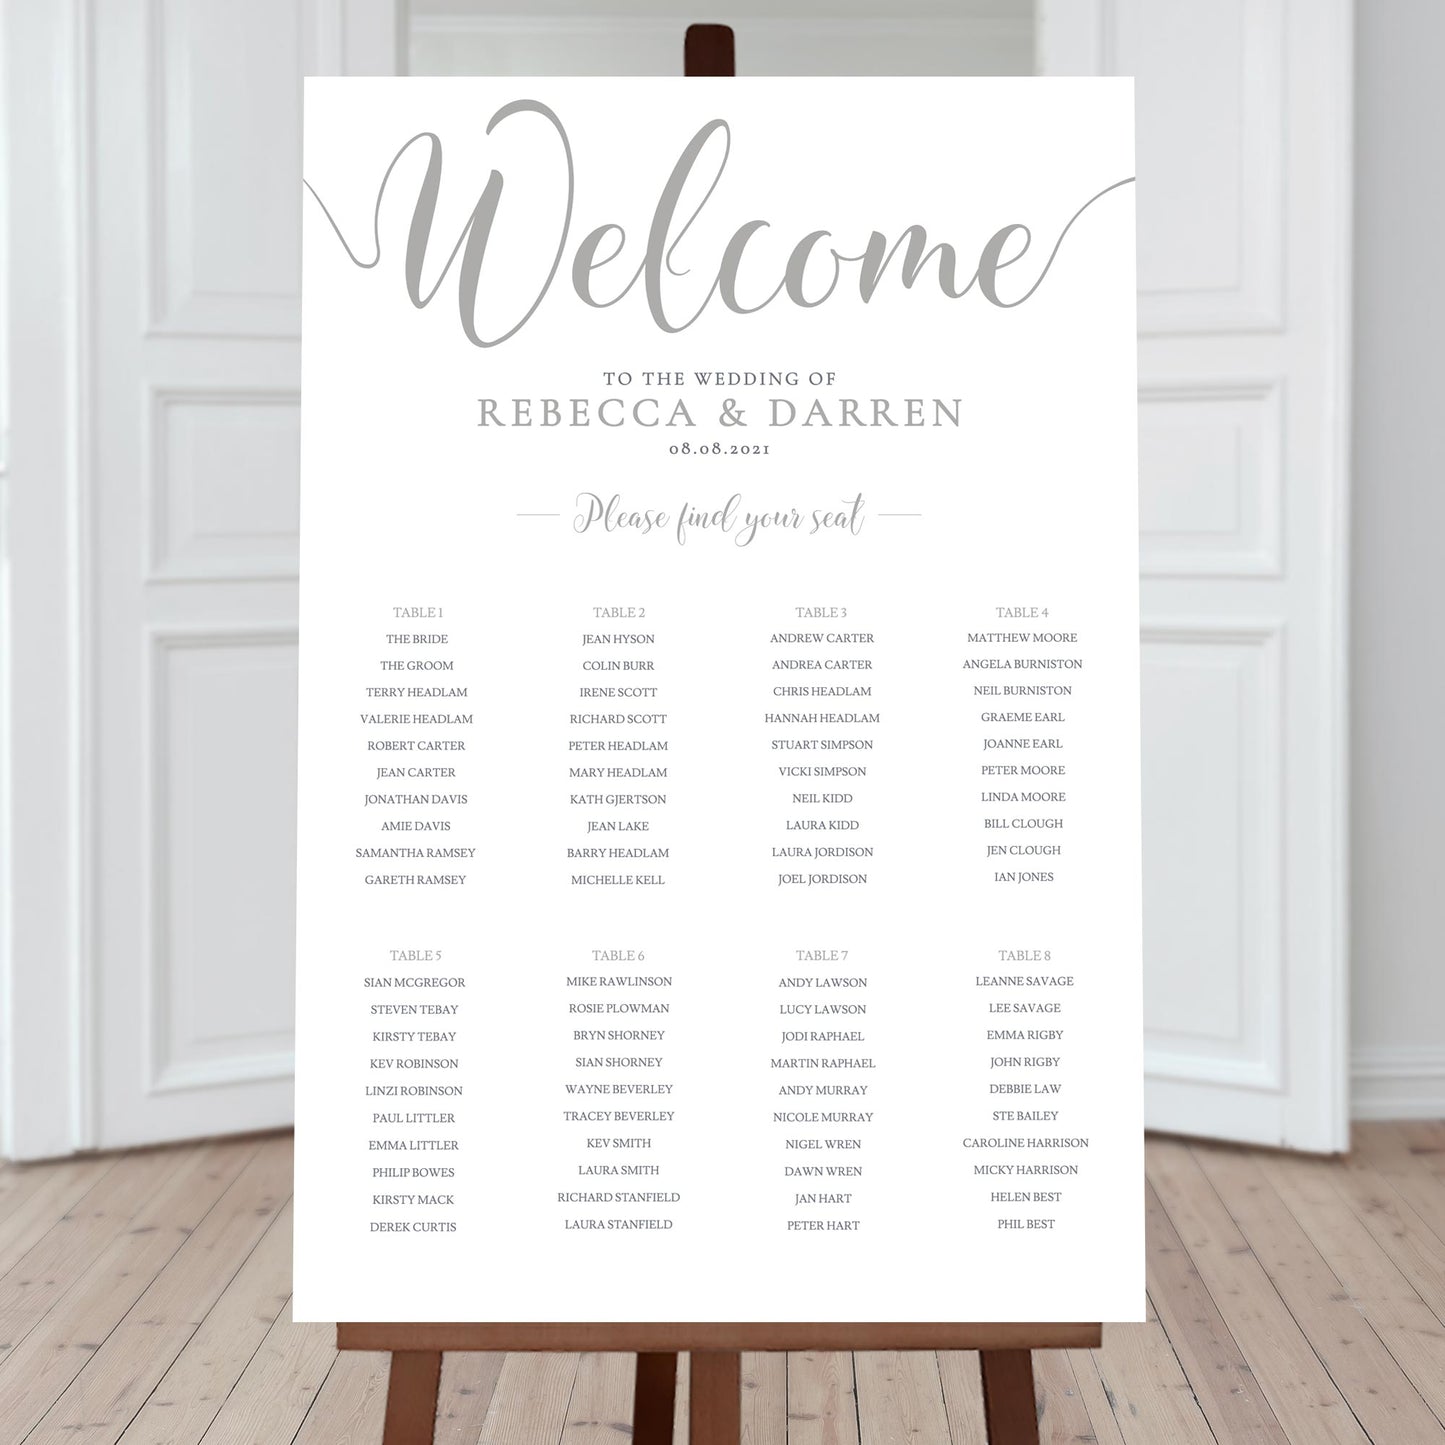 8 table wedding seating plan in silver